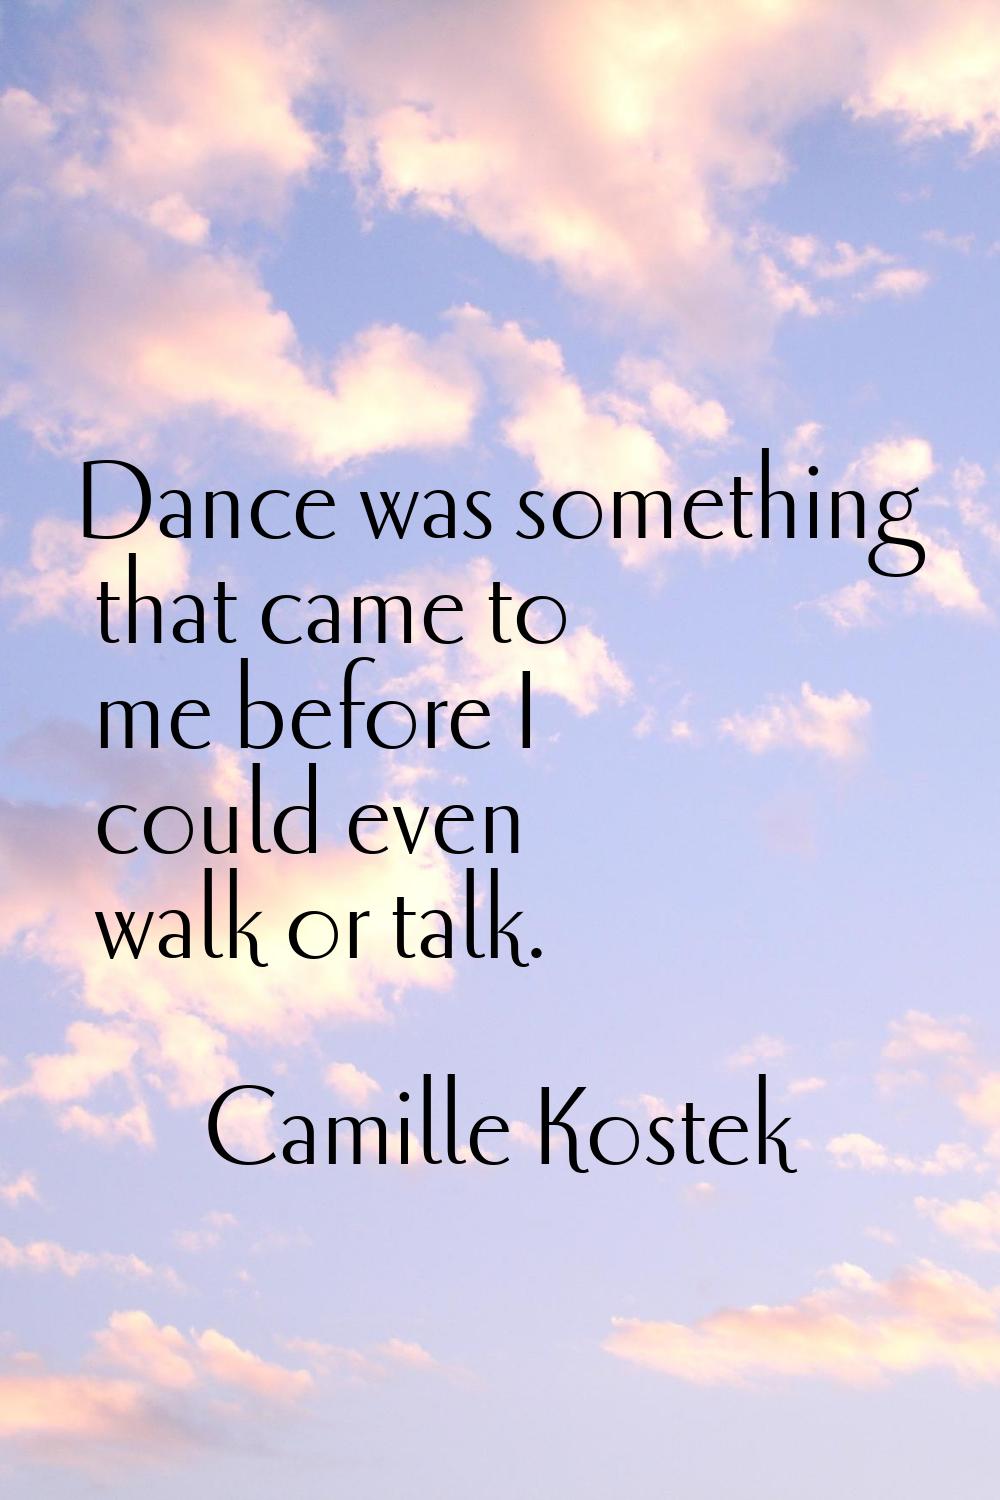 Dance was something that came to me before I could even walk or talk.